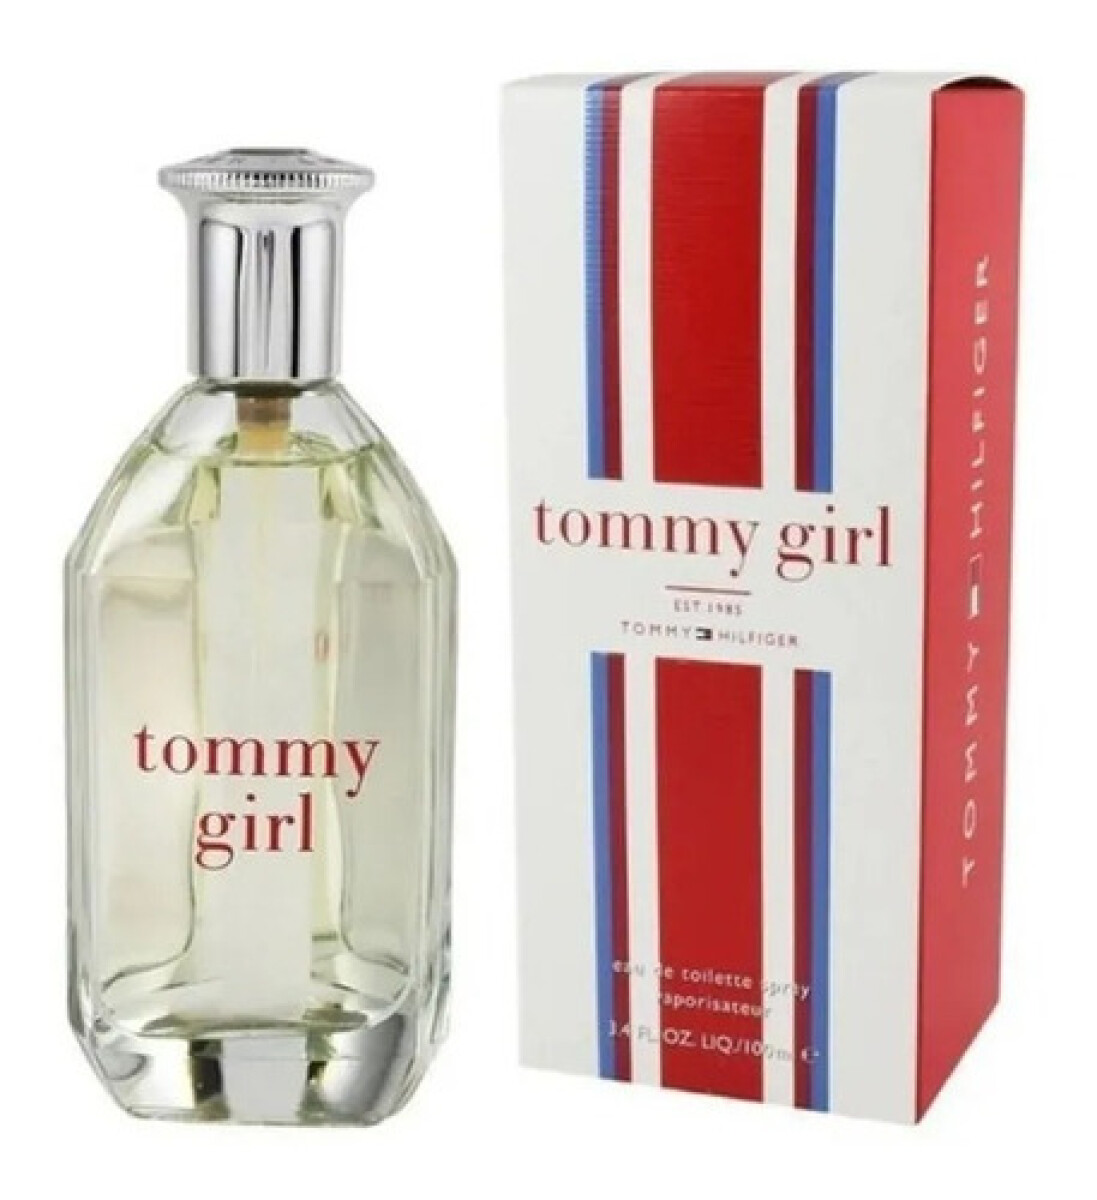 TOMMY GIRL EDT 100ML 